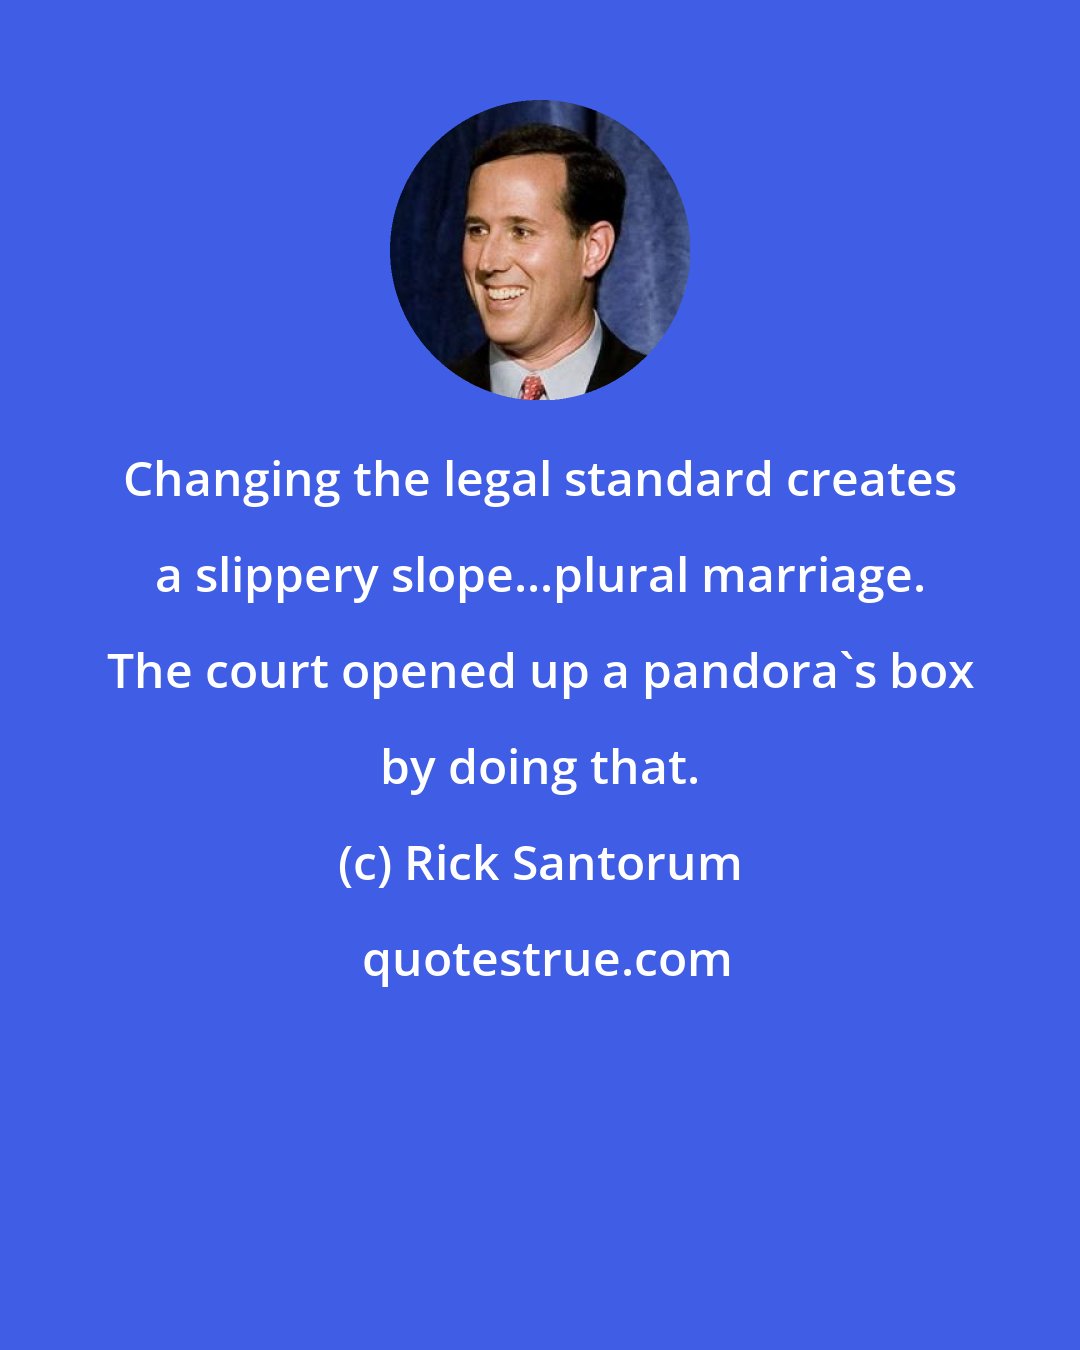 Rick Santorum: Changing the legal standard creates a slippery slope...plural marriage. The court opened up a pandora's box by doing that.